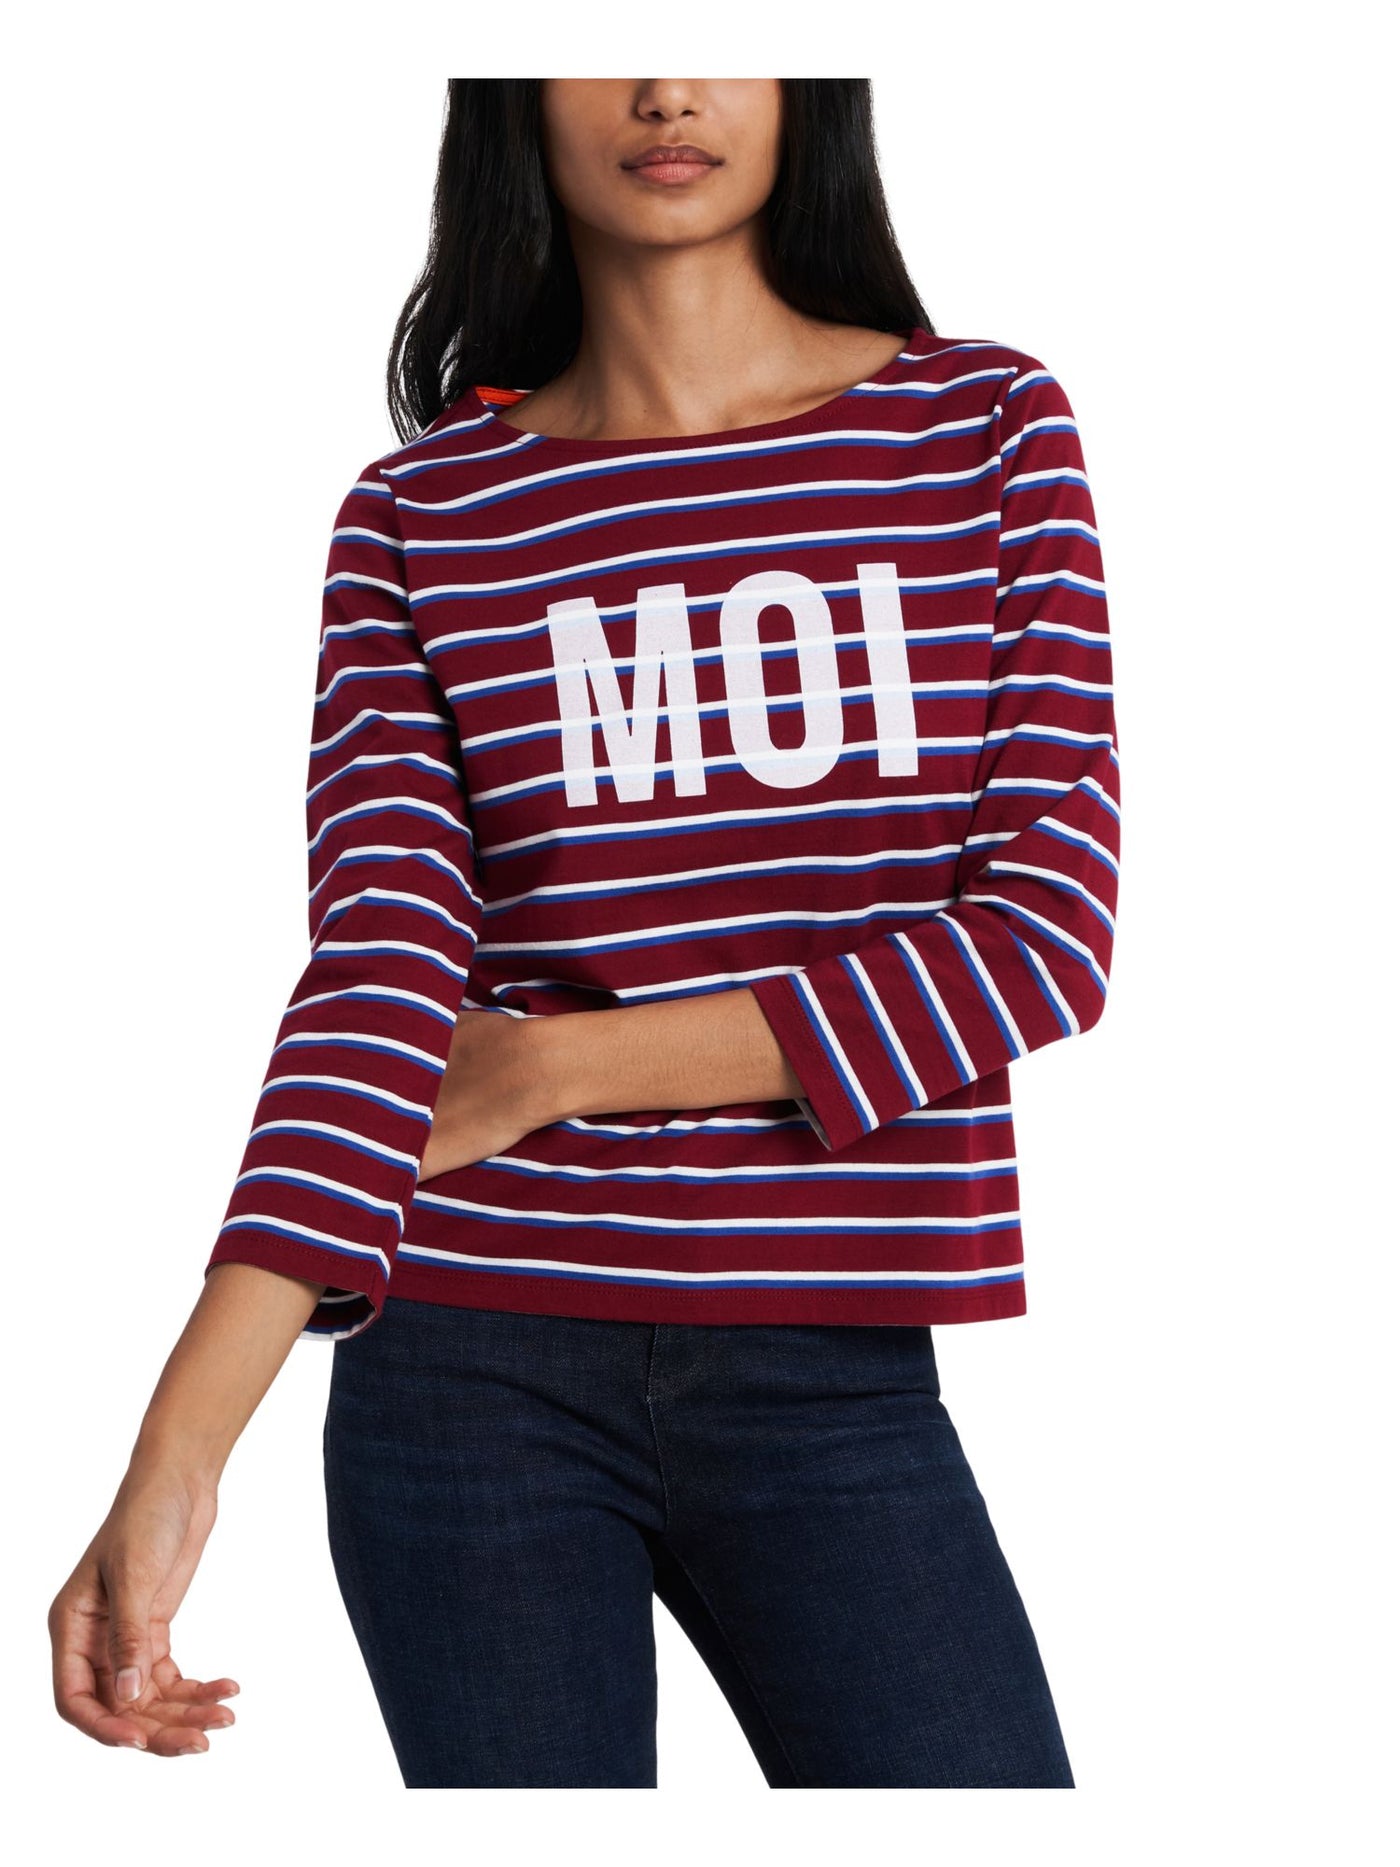 RILEY&RAE Womens Red Cotton Embroidered Striped 3/4 Sleeve Crew Neck Top S